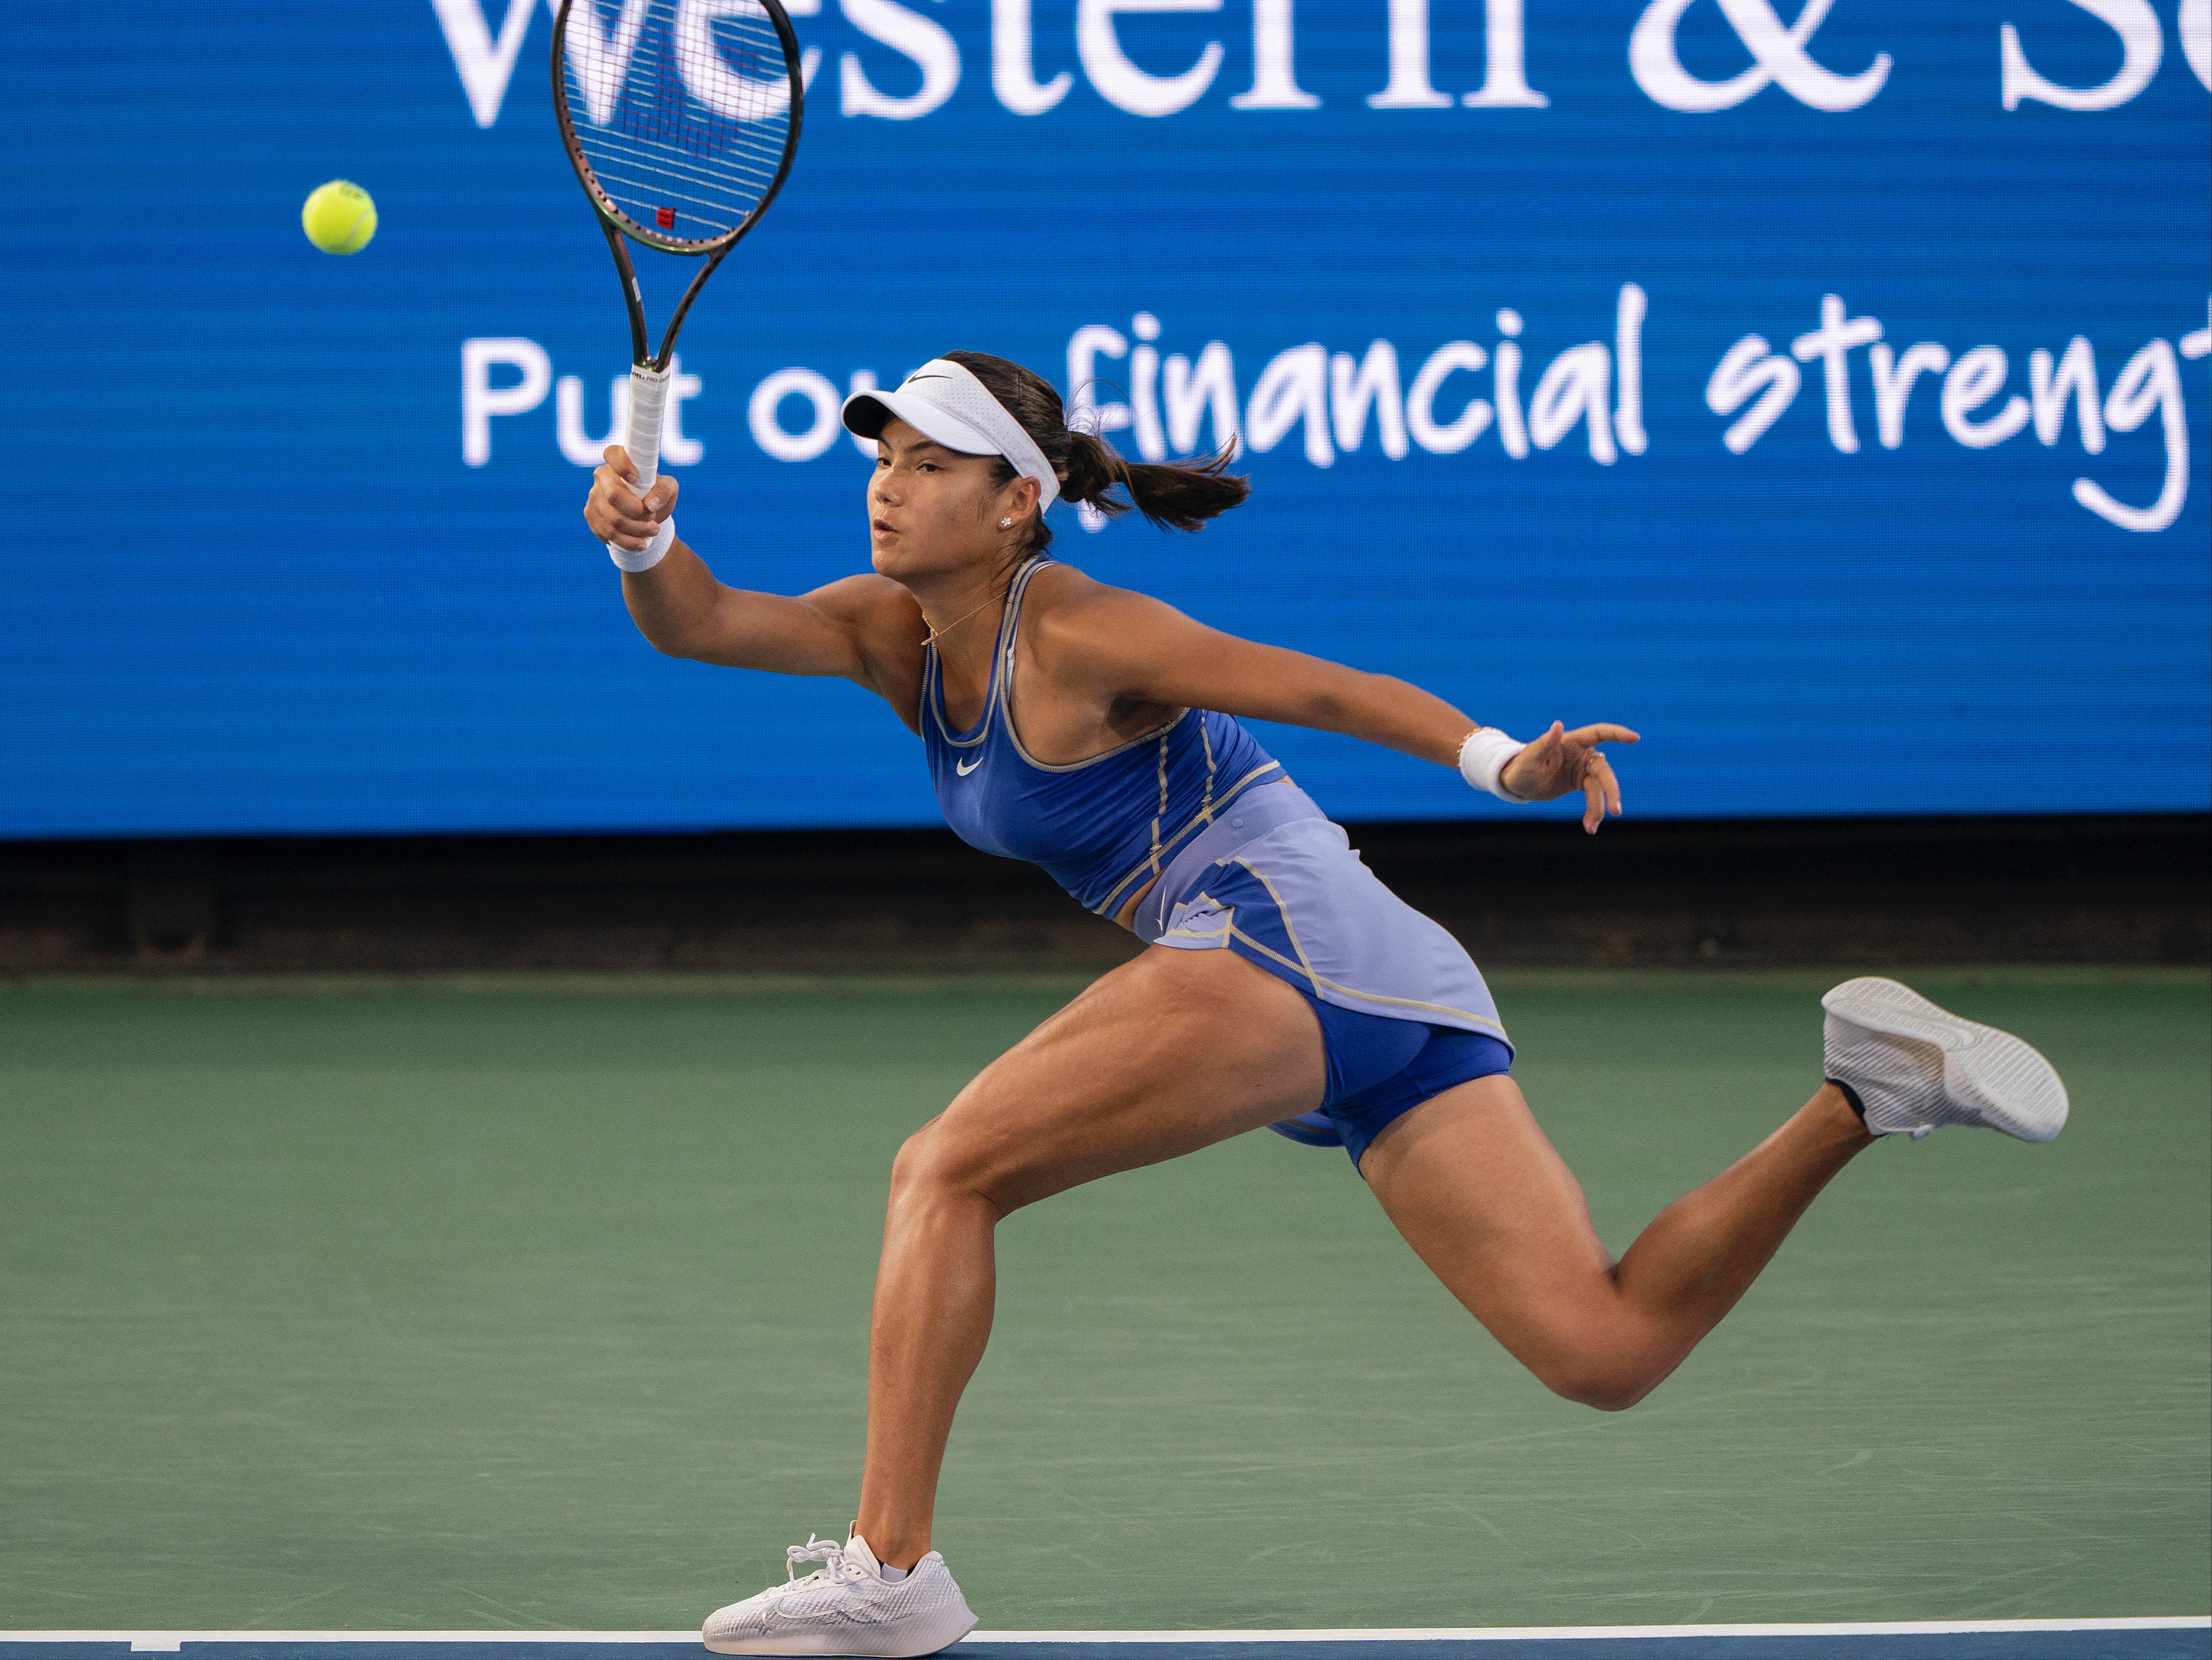 Emma Raducanu’s scintillating early run at the Western and Southern Open has ended in a 7-5 6-4 defeat to Jessica Pegula